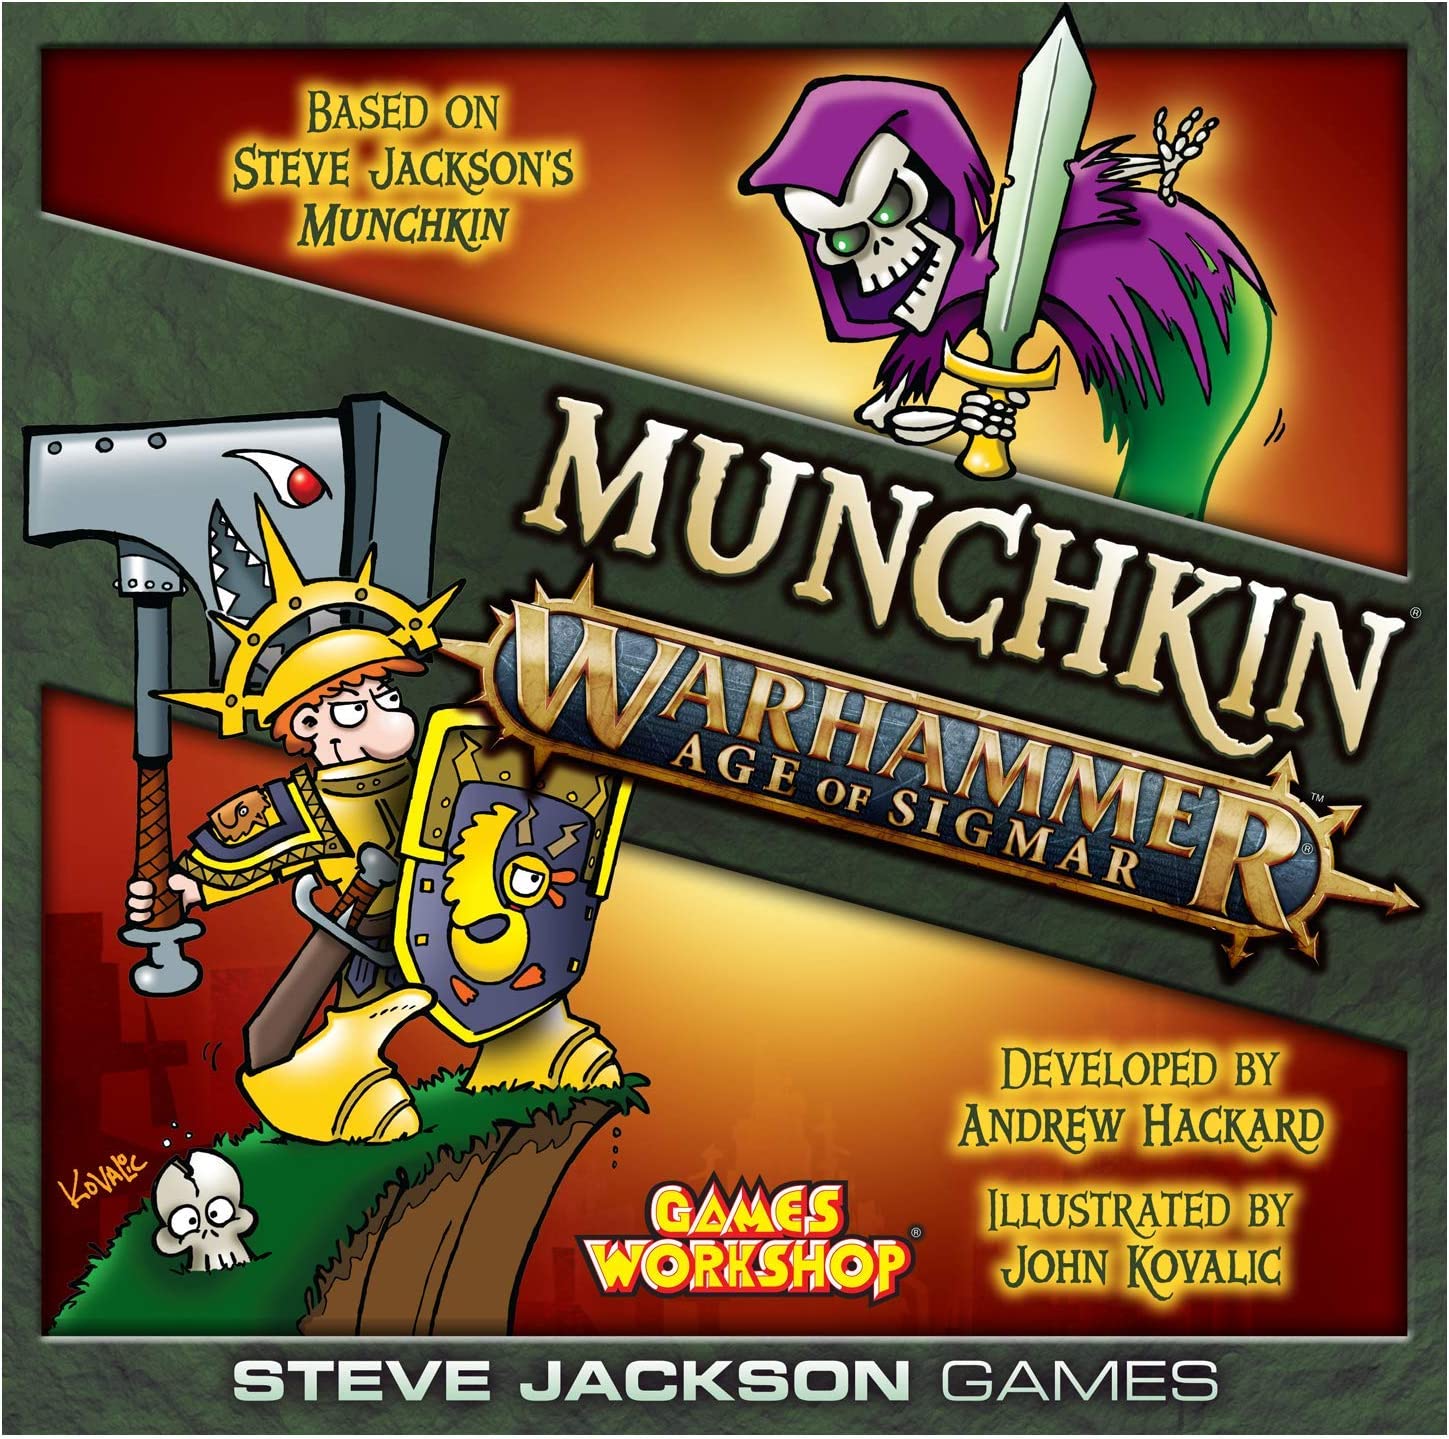 Munchkin Warhammer Age of Sigmar Board Game $21 Free Store Pickup at Barnes & Noble or Free Shipping on $40+